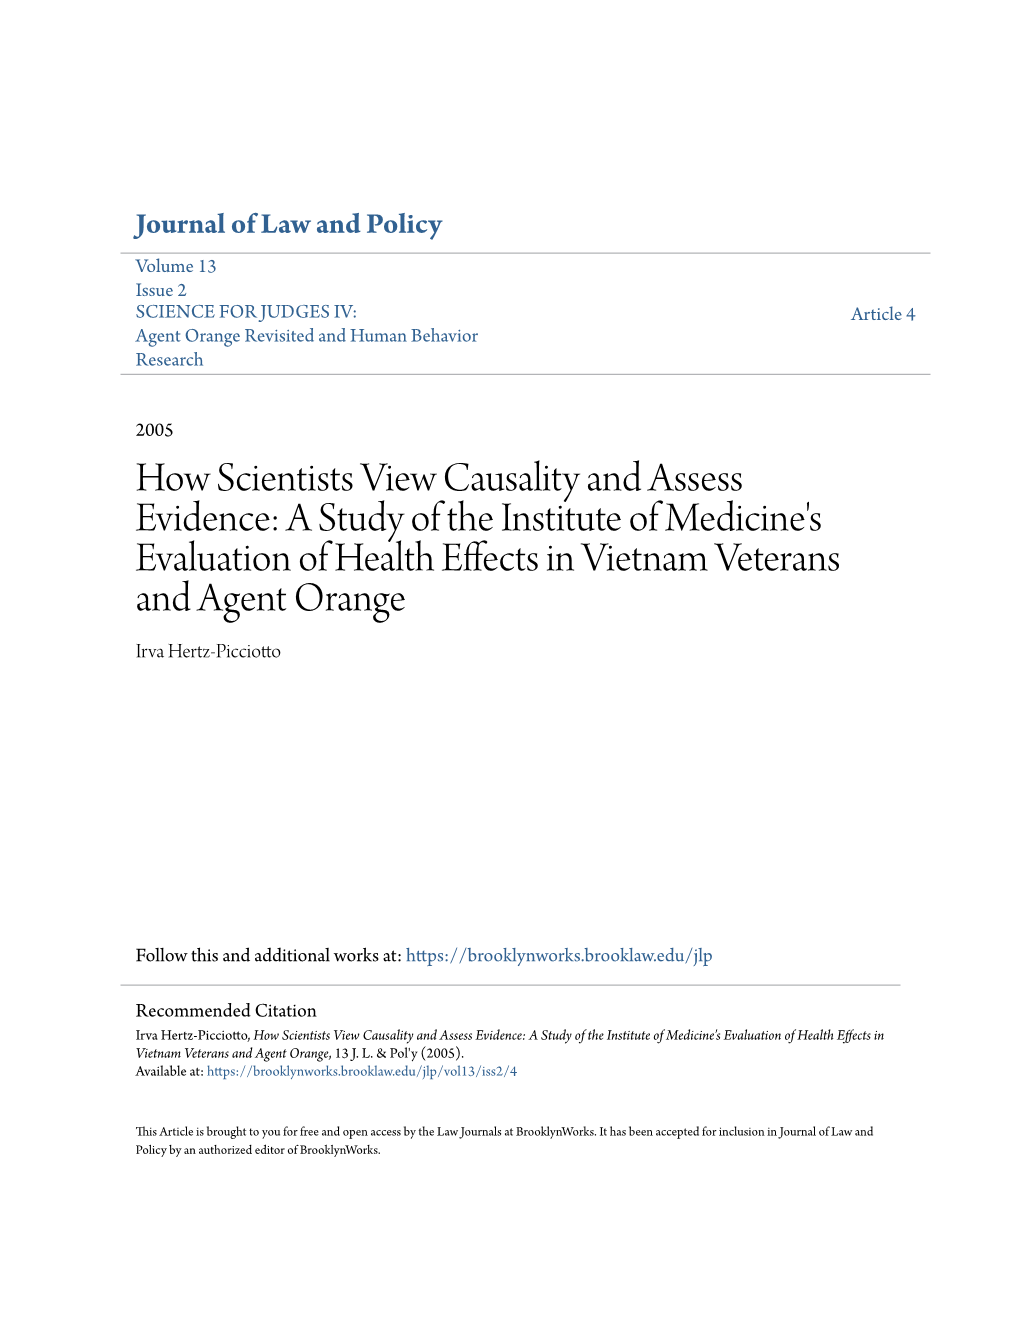 How Scientists View Causality and Assess Evidence: a Study of The